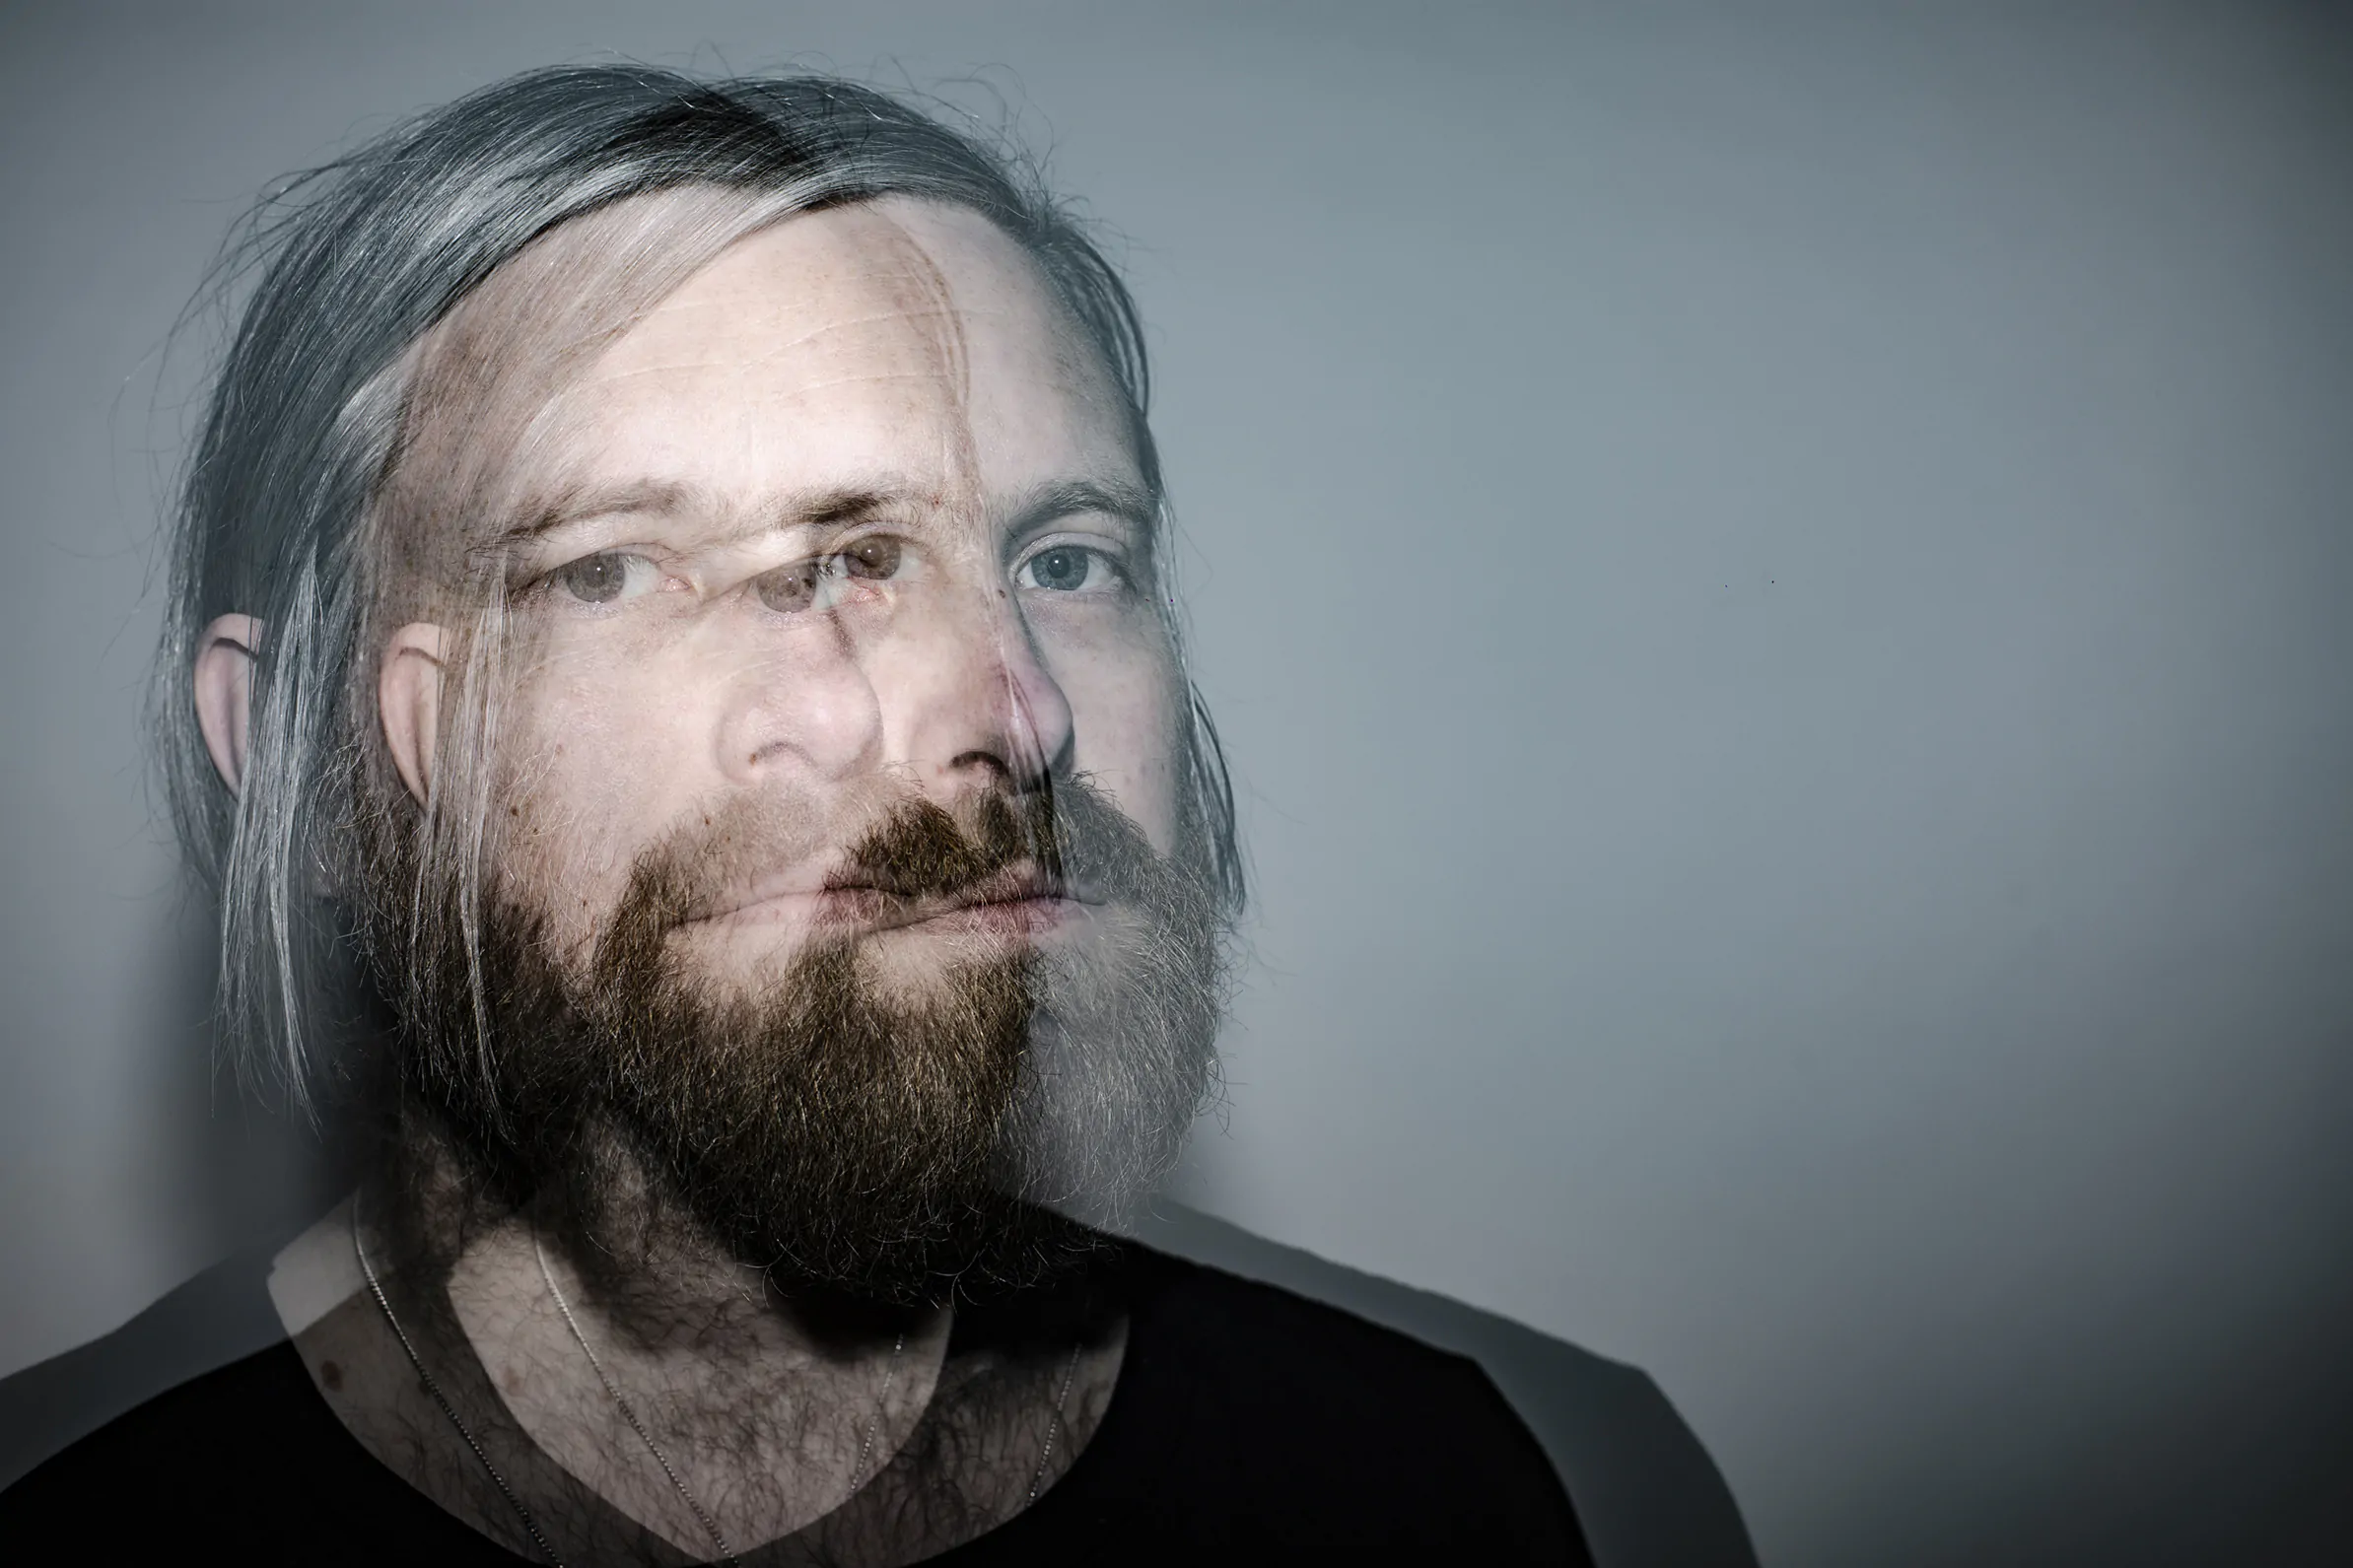 BLANCK MASS announces limited edition LP ‘Mind Killer’ – Out May 14th